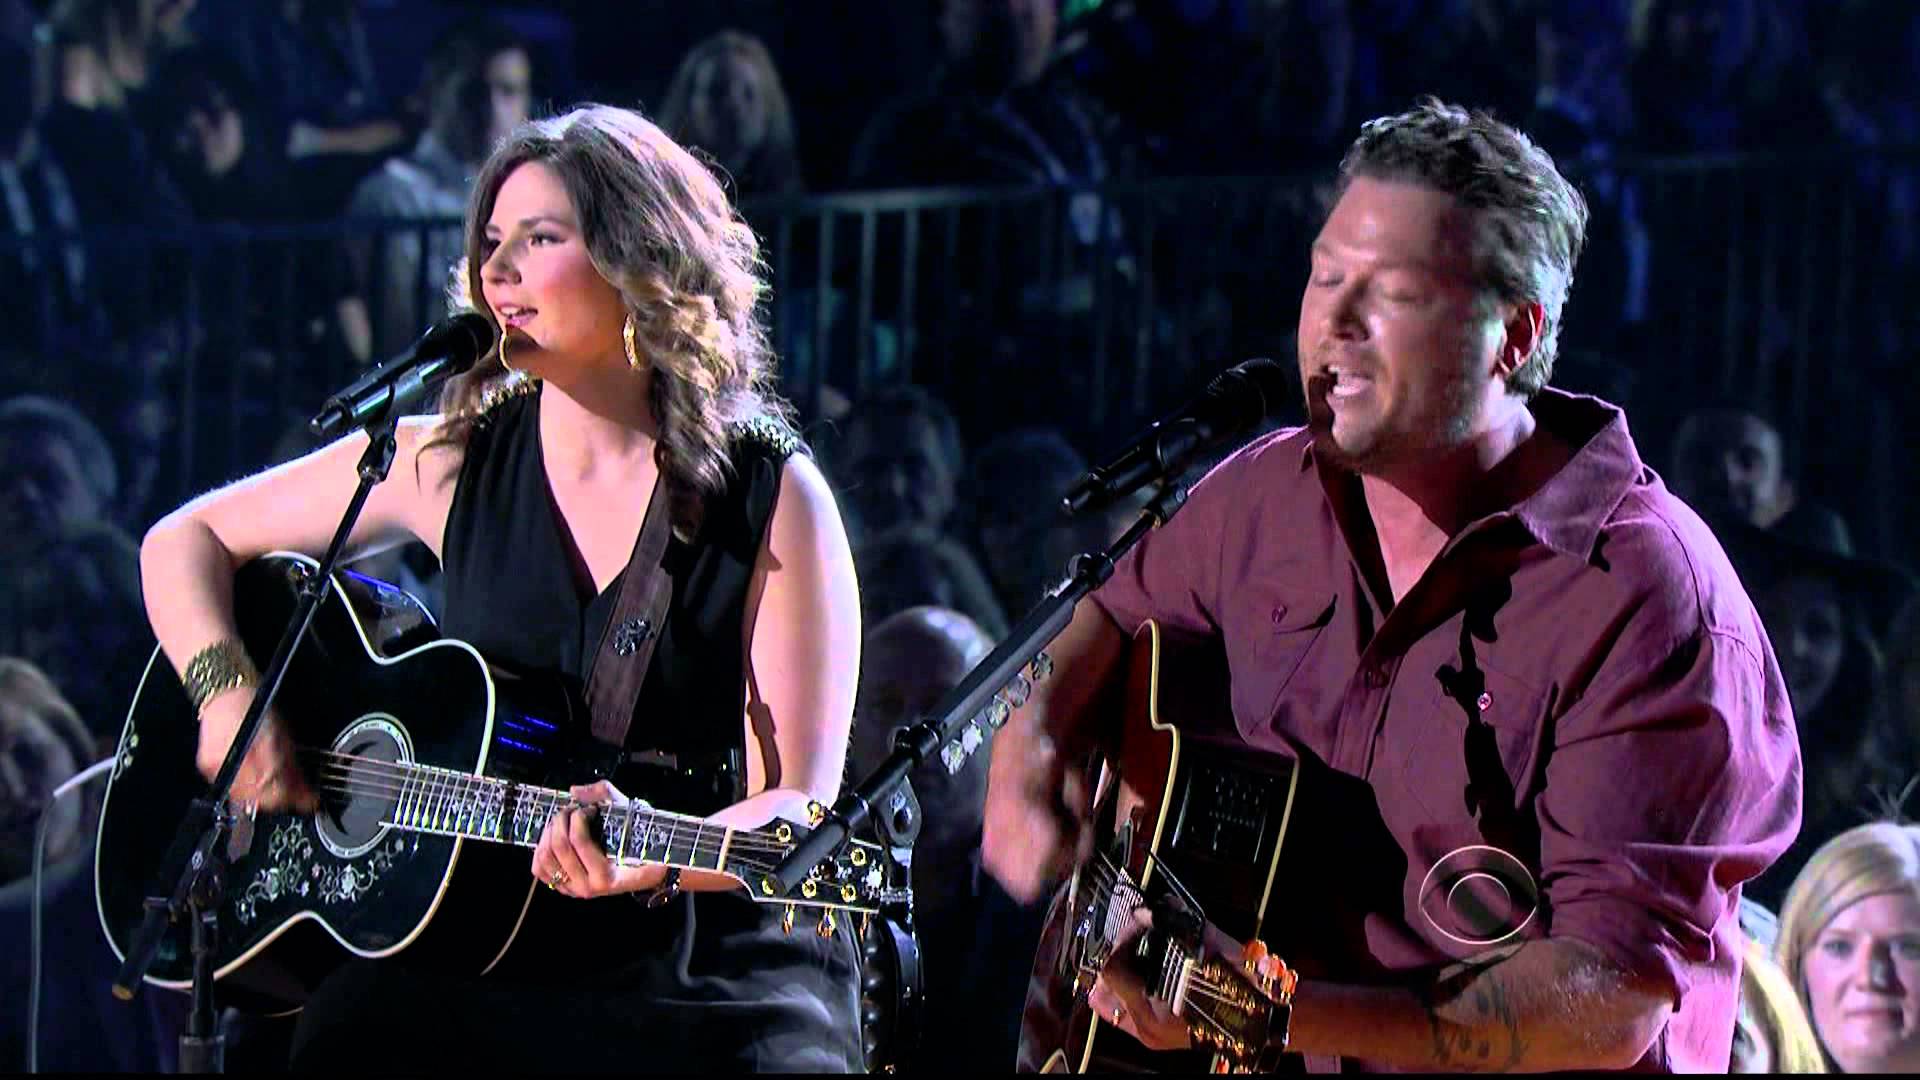 So many GREAT performances last night at the 2013 CMA's..here's one of our favorites ...